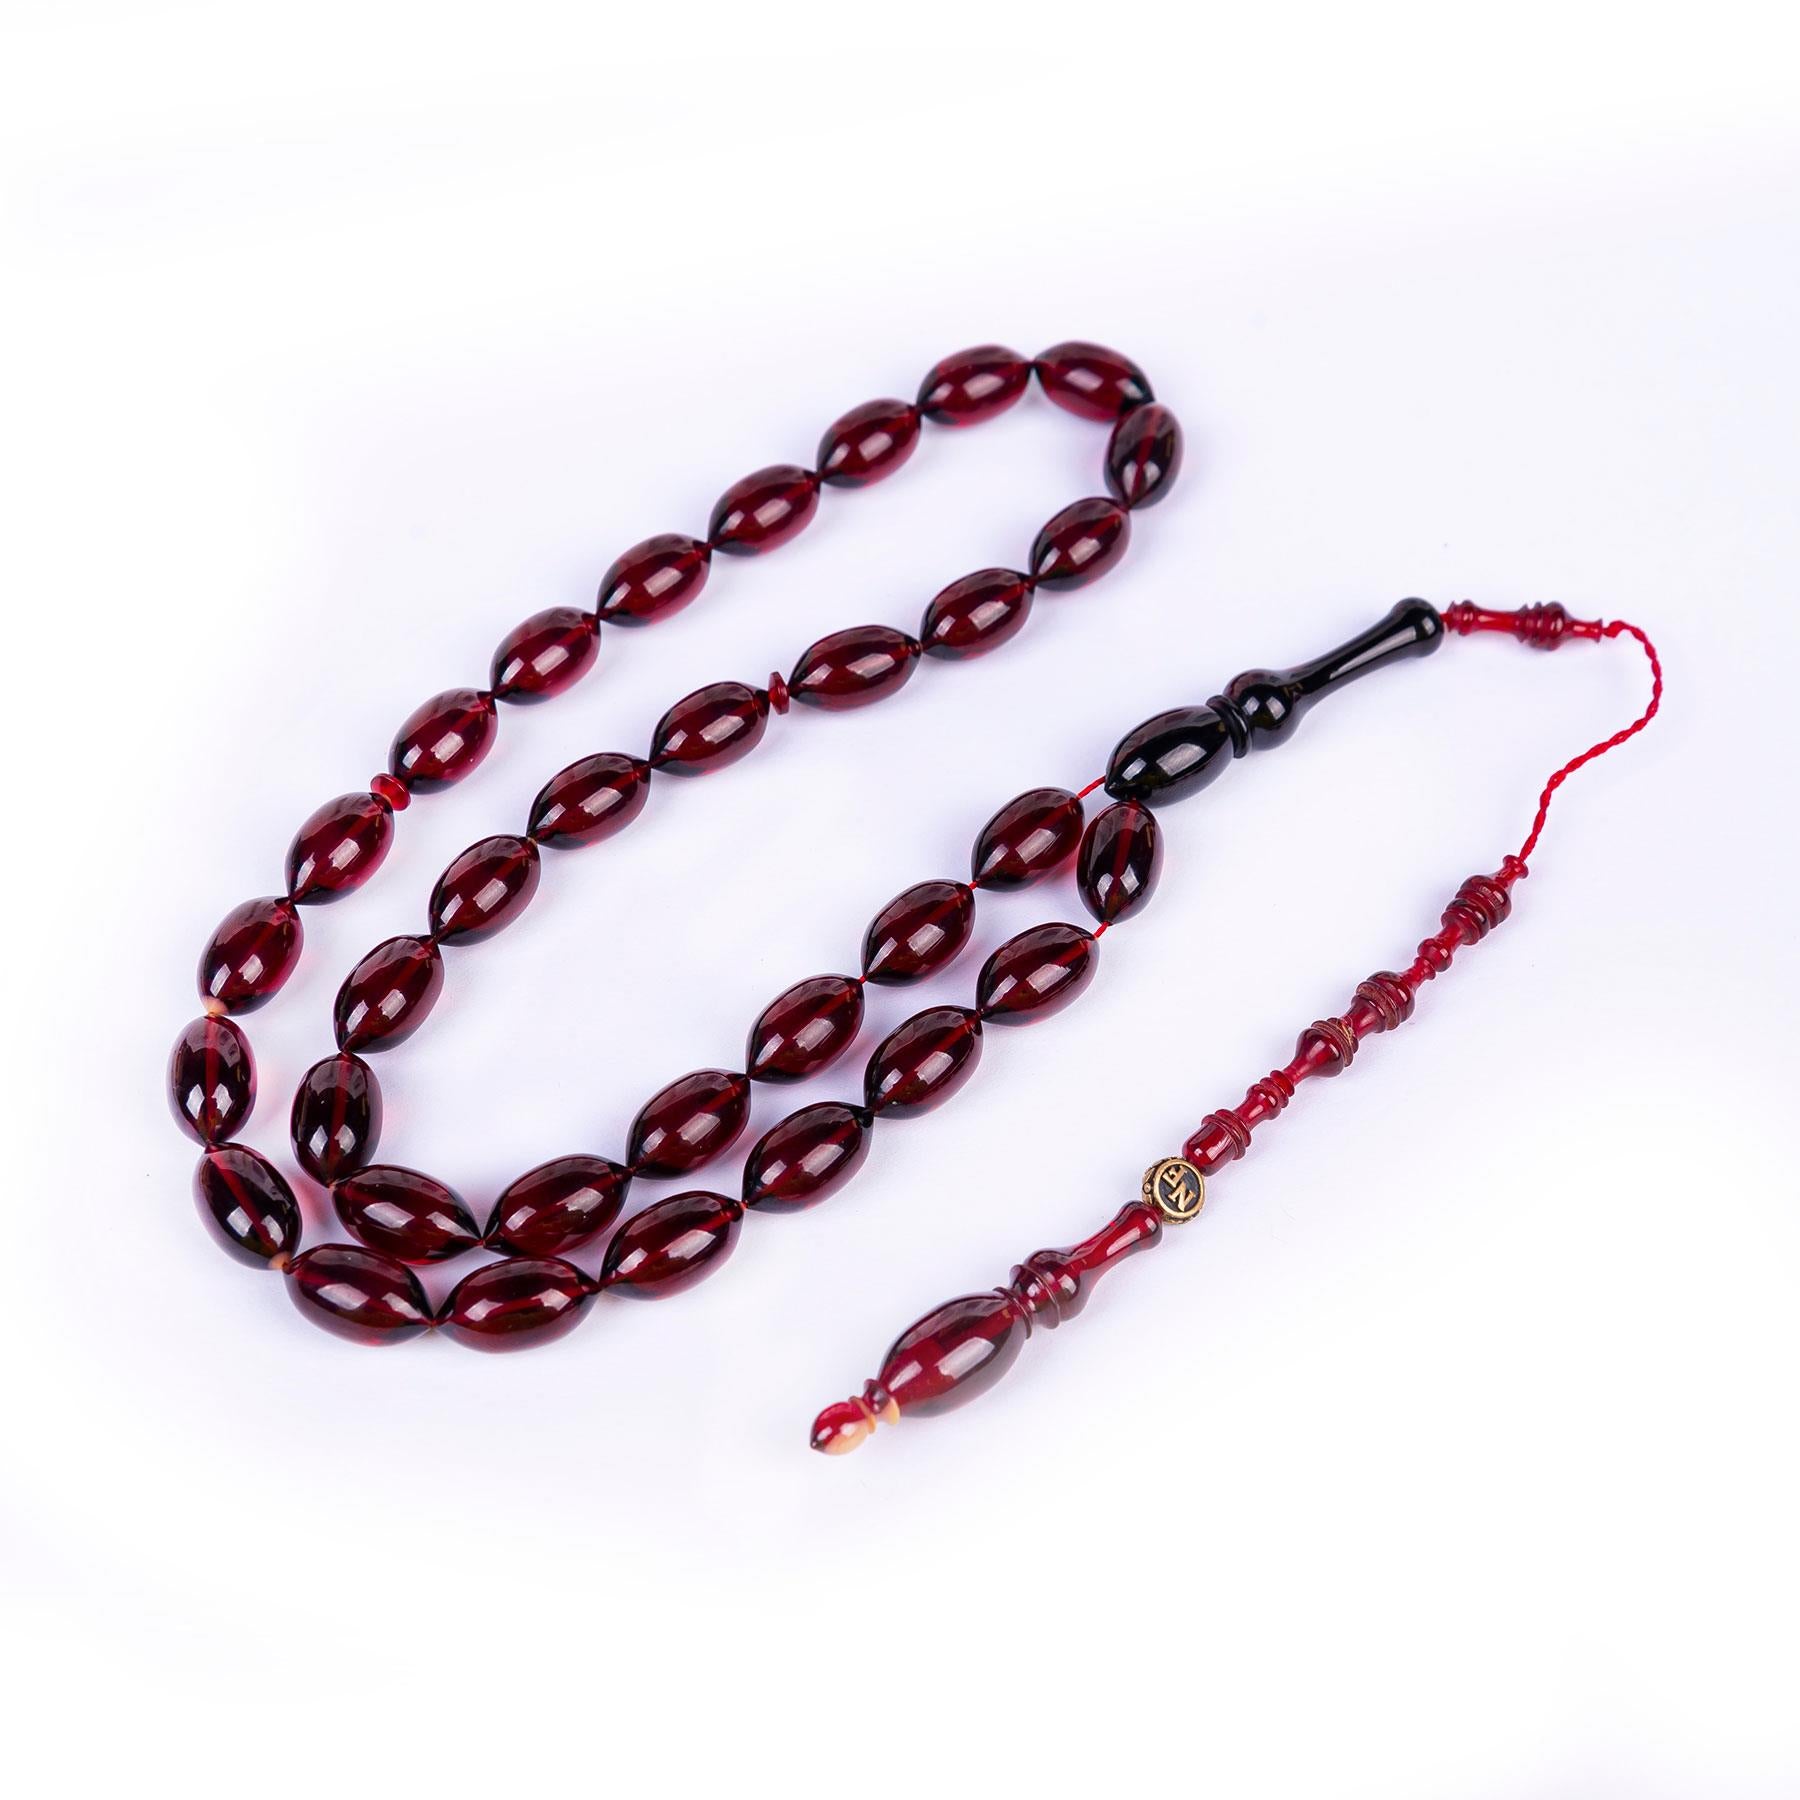 Ve Tesbih Systematic Solid Model Pressed Amber Prayer Beads 4